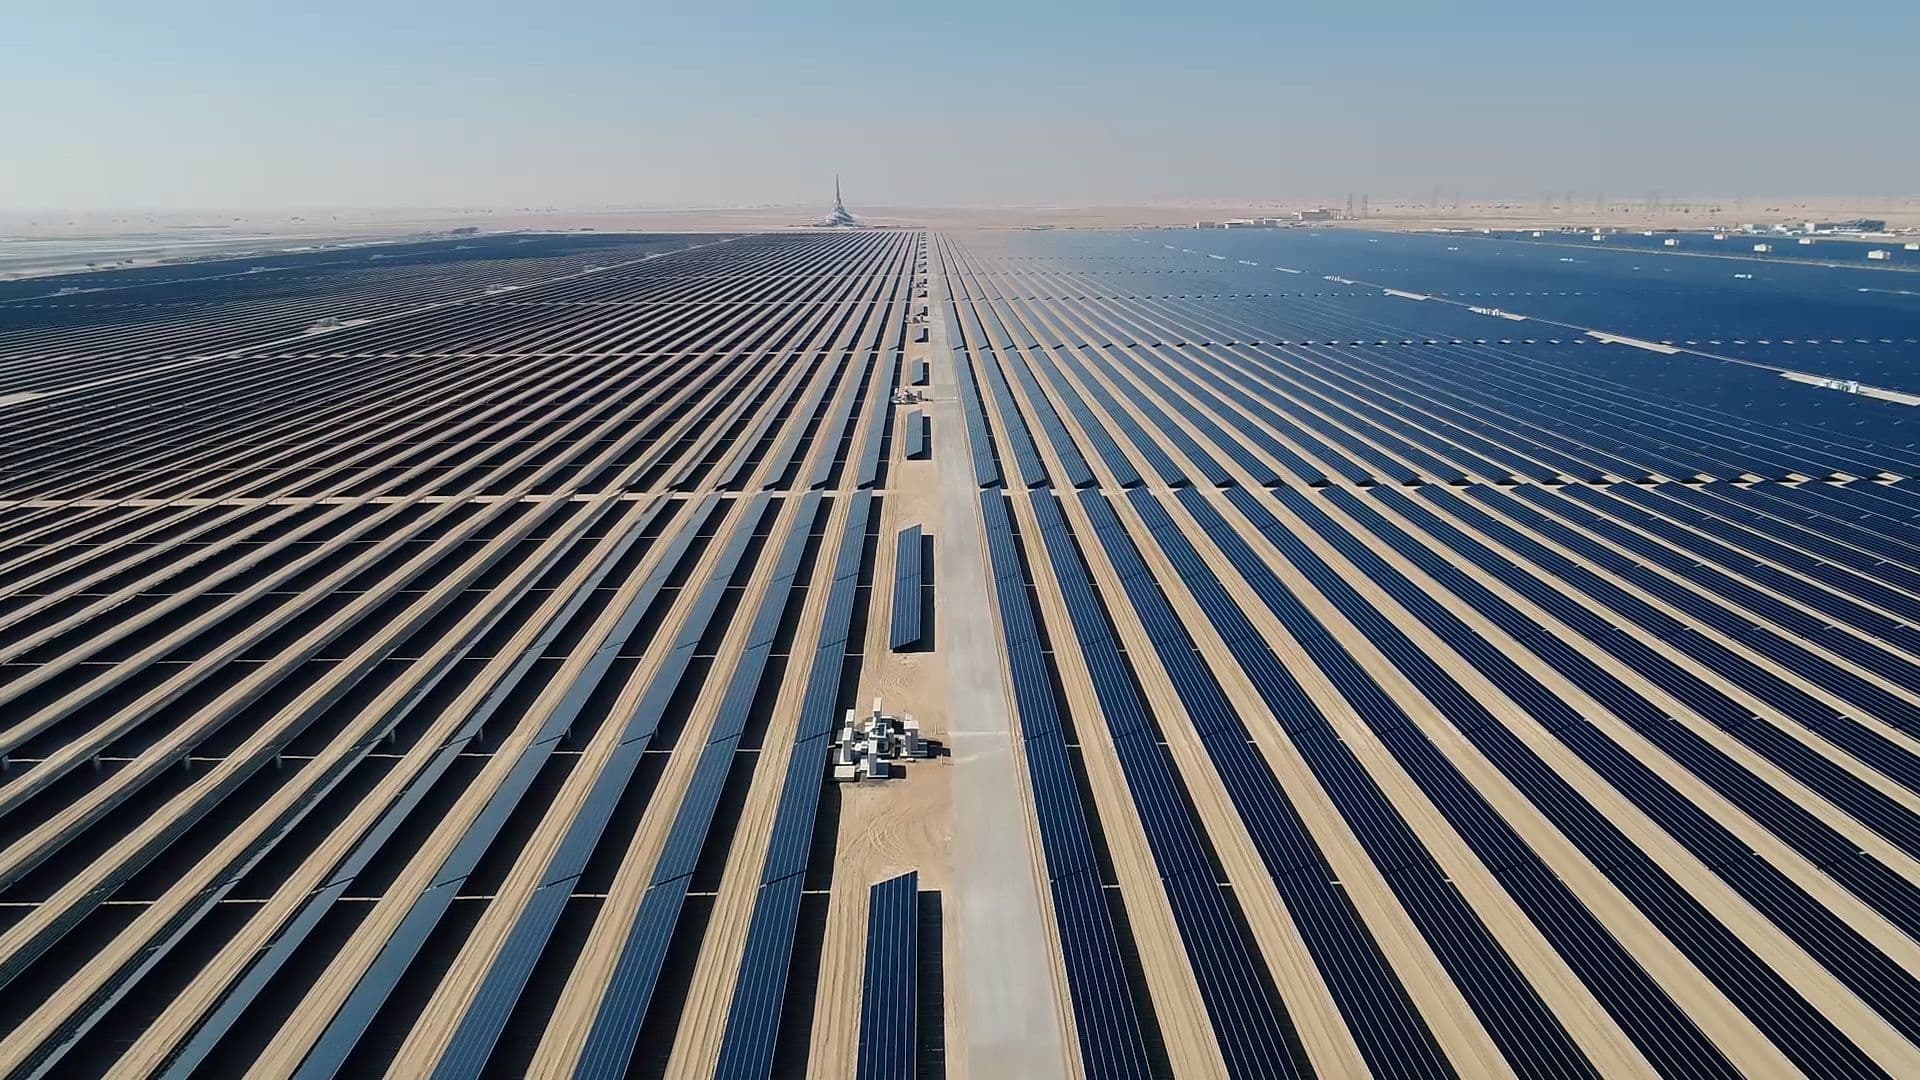 Dubai to Increase Share of Renewable Sources by the End of the Year